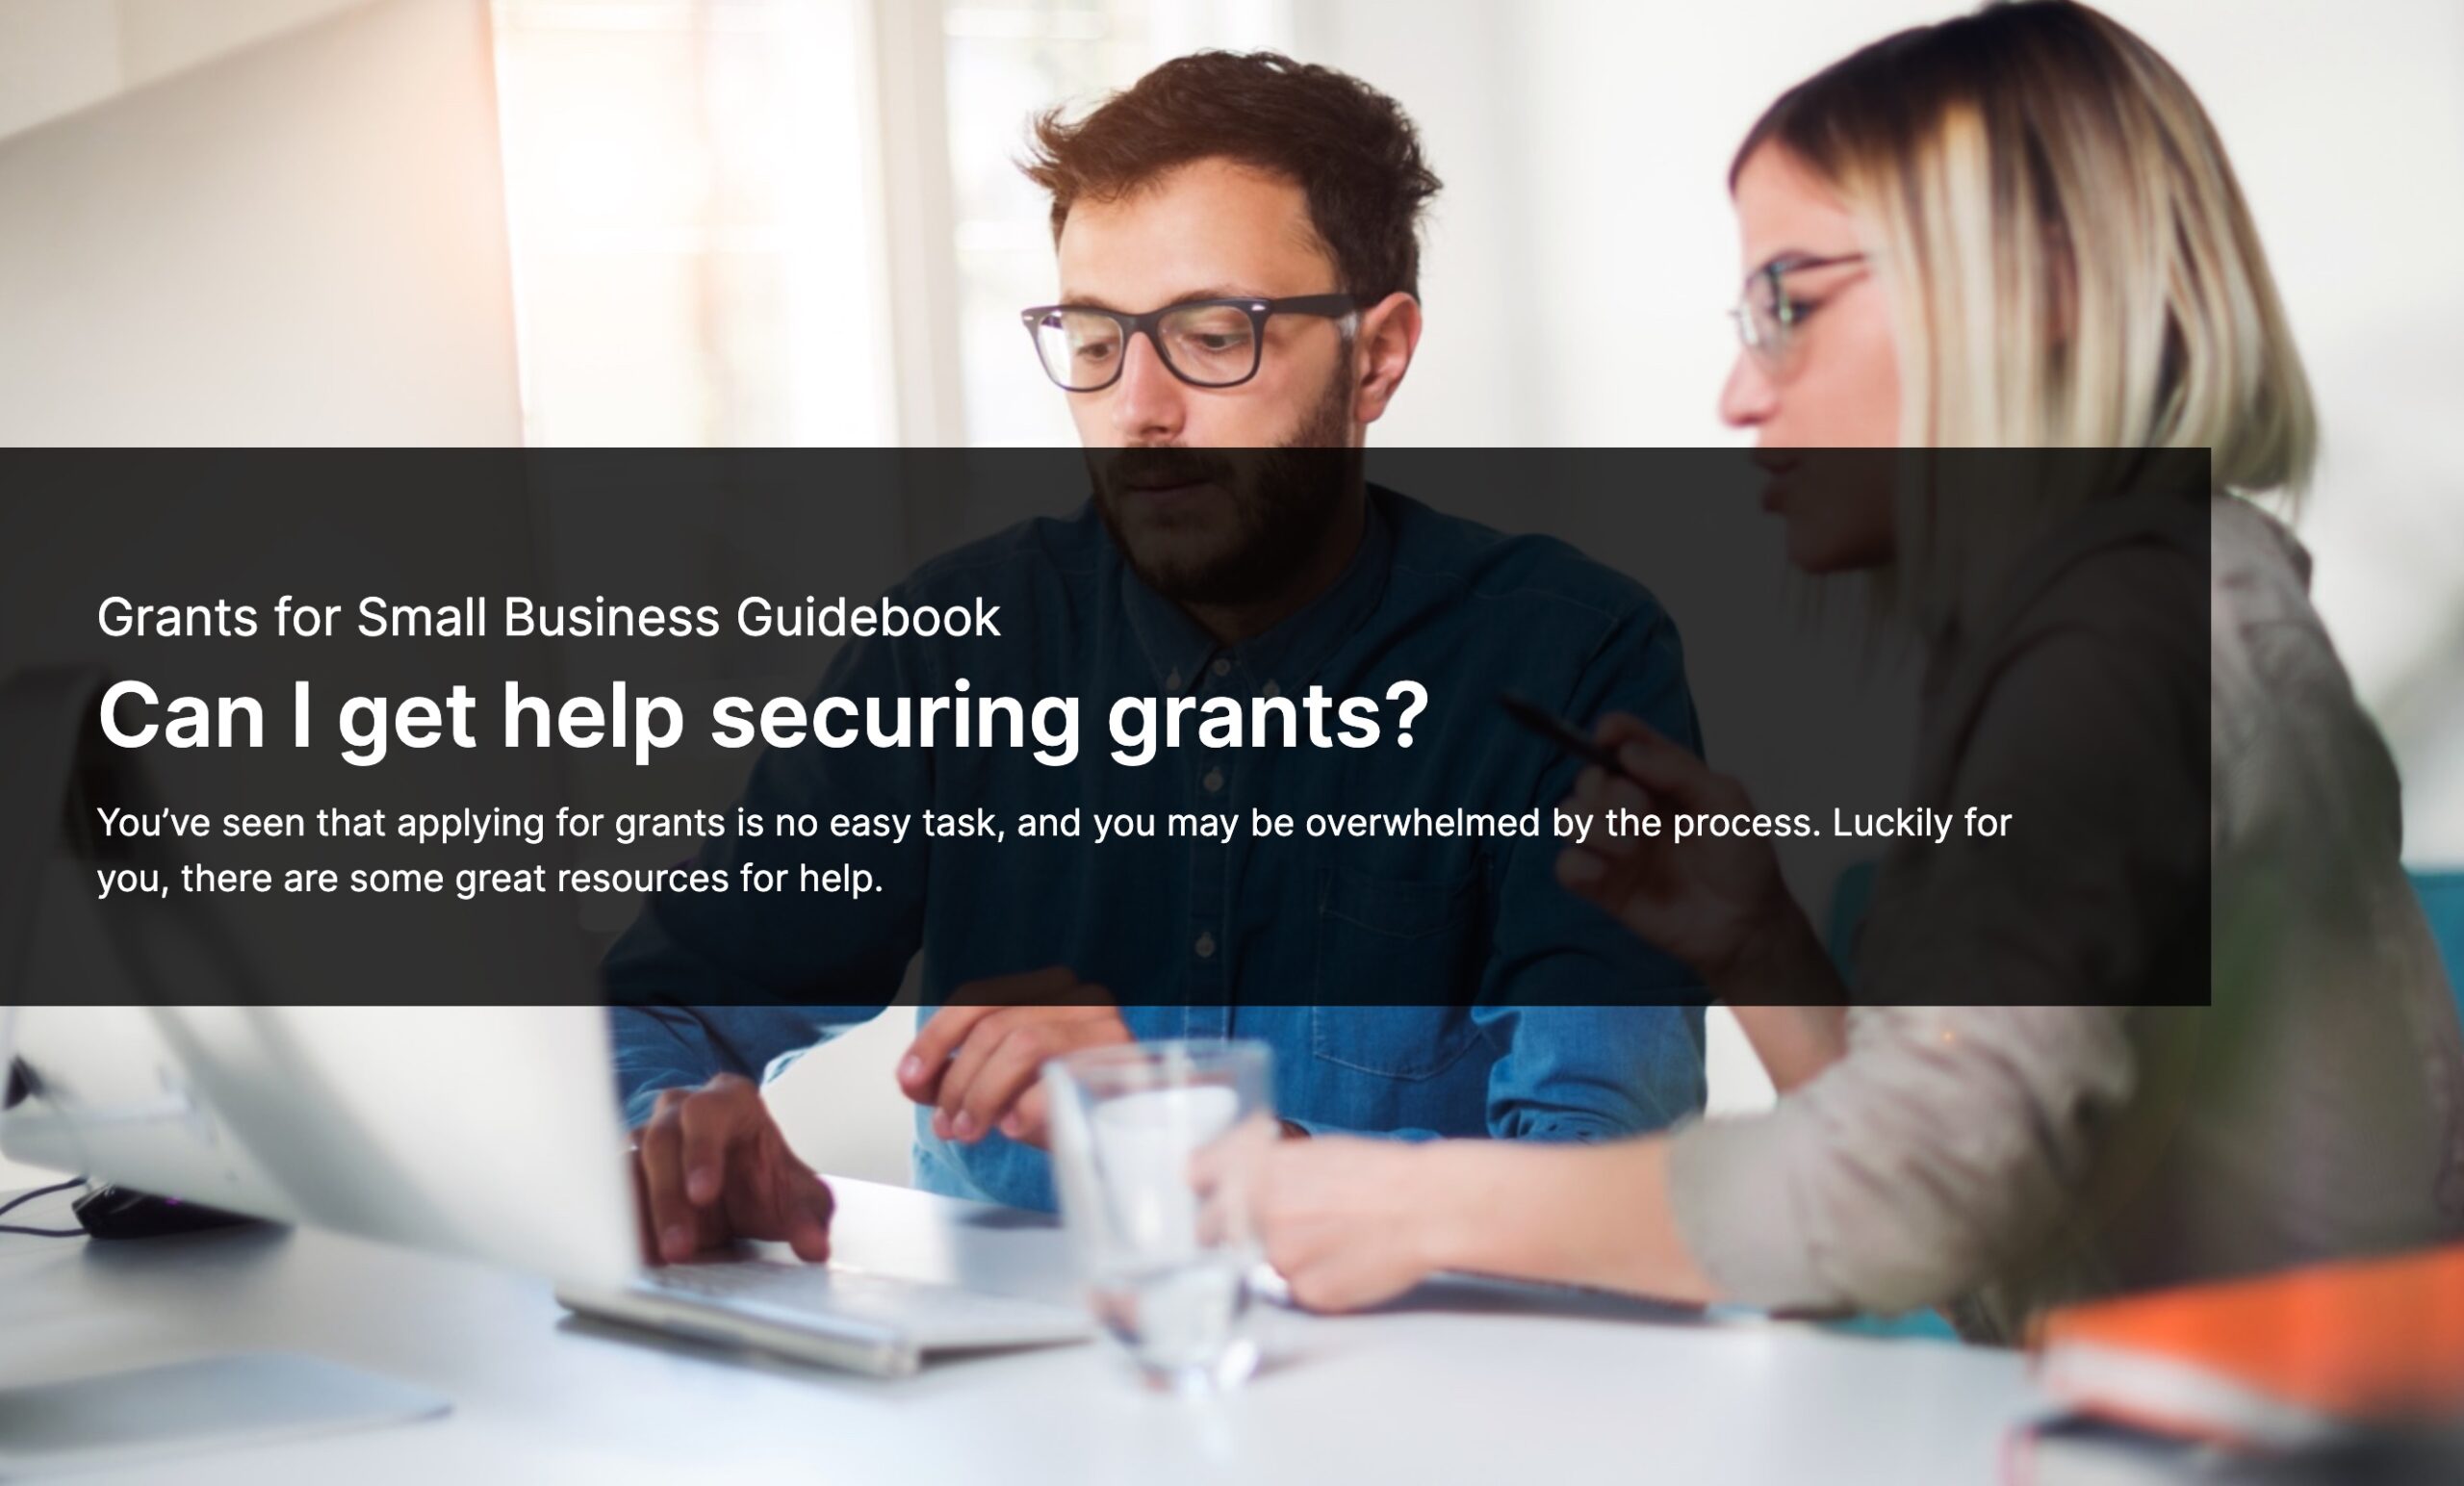 can-i-get-help-securing-grants-grants-for-small-business-guidebook